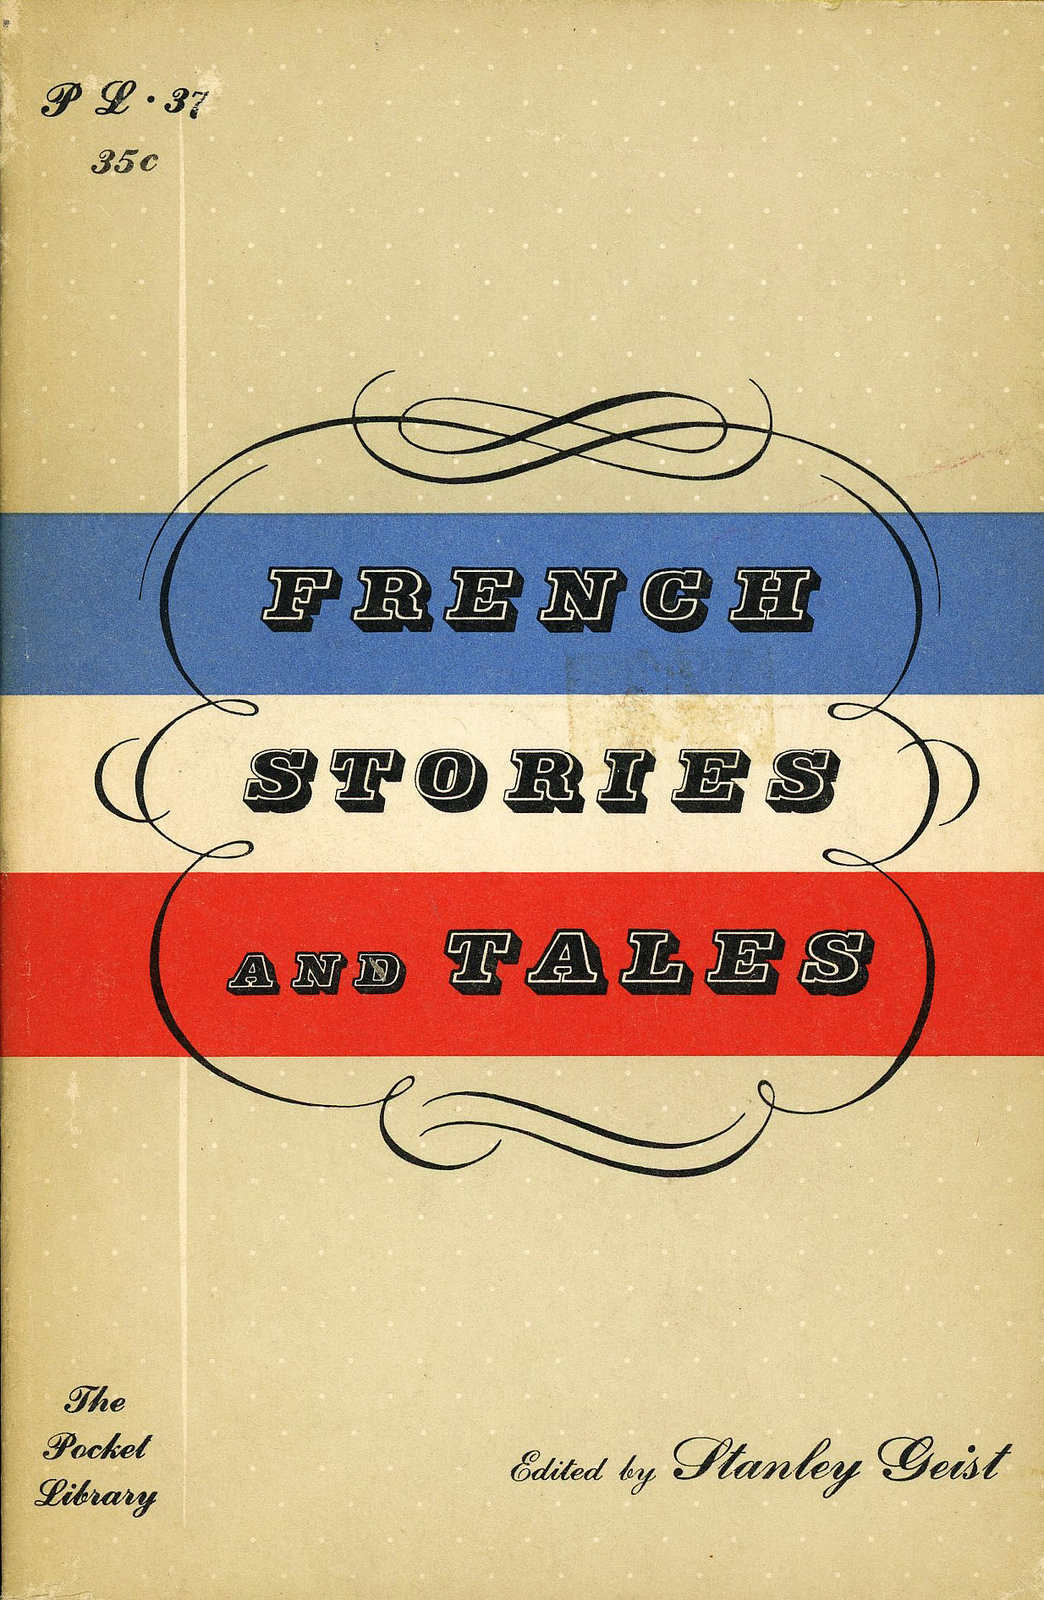 French Stories and Tales by Stanley Geist (Ed.) - Fonts In Use